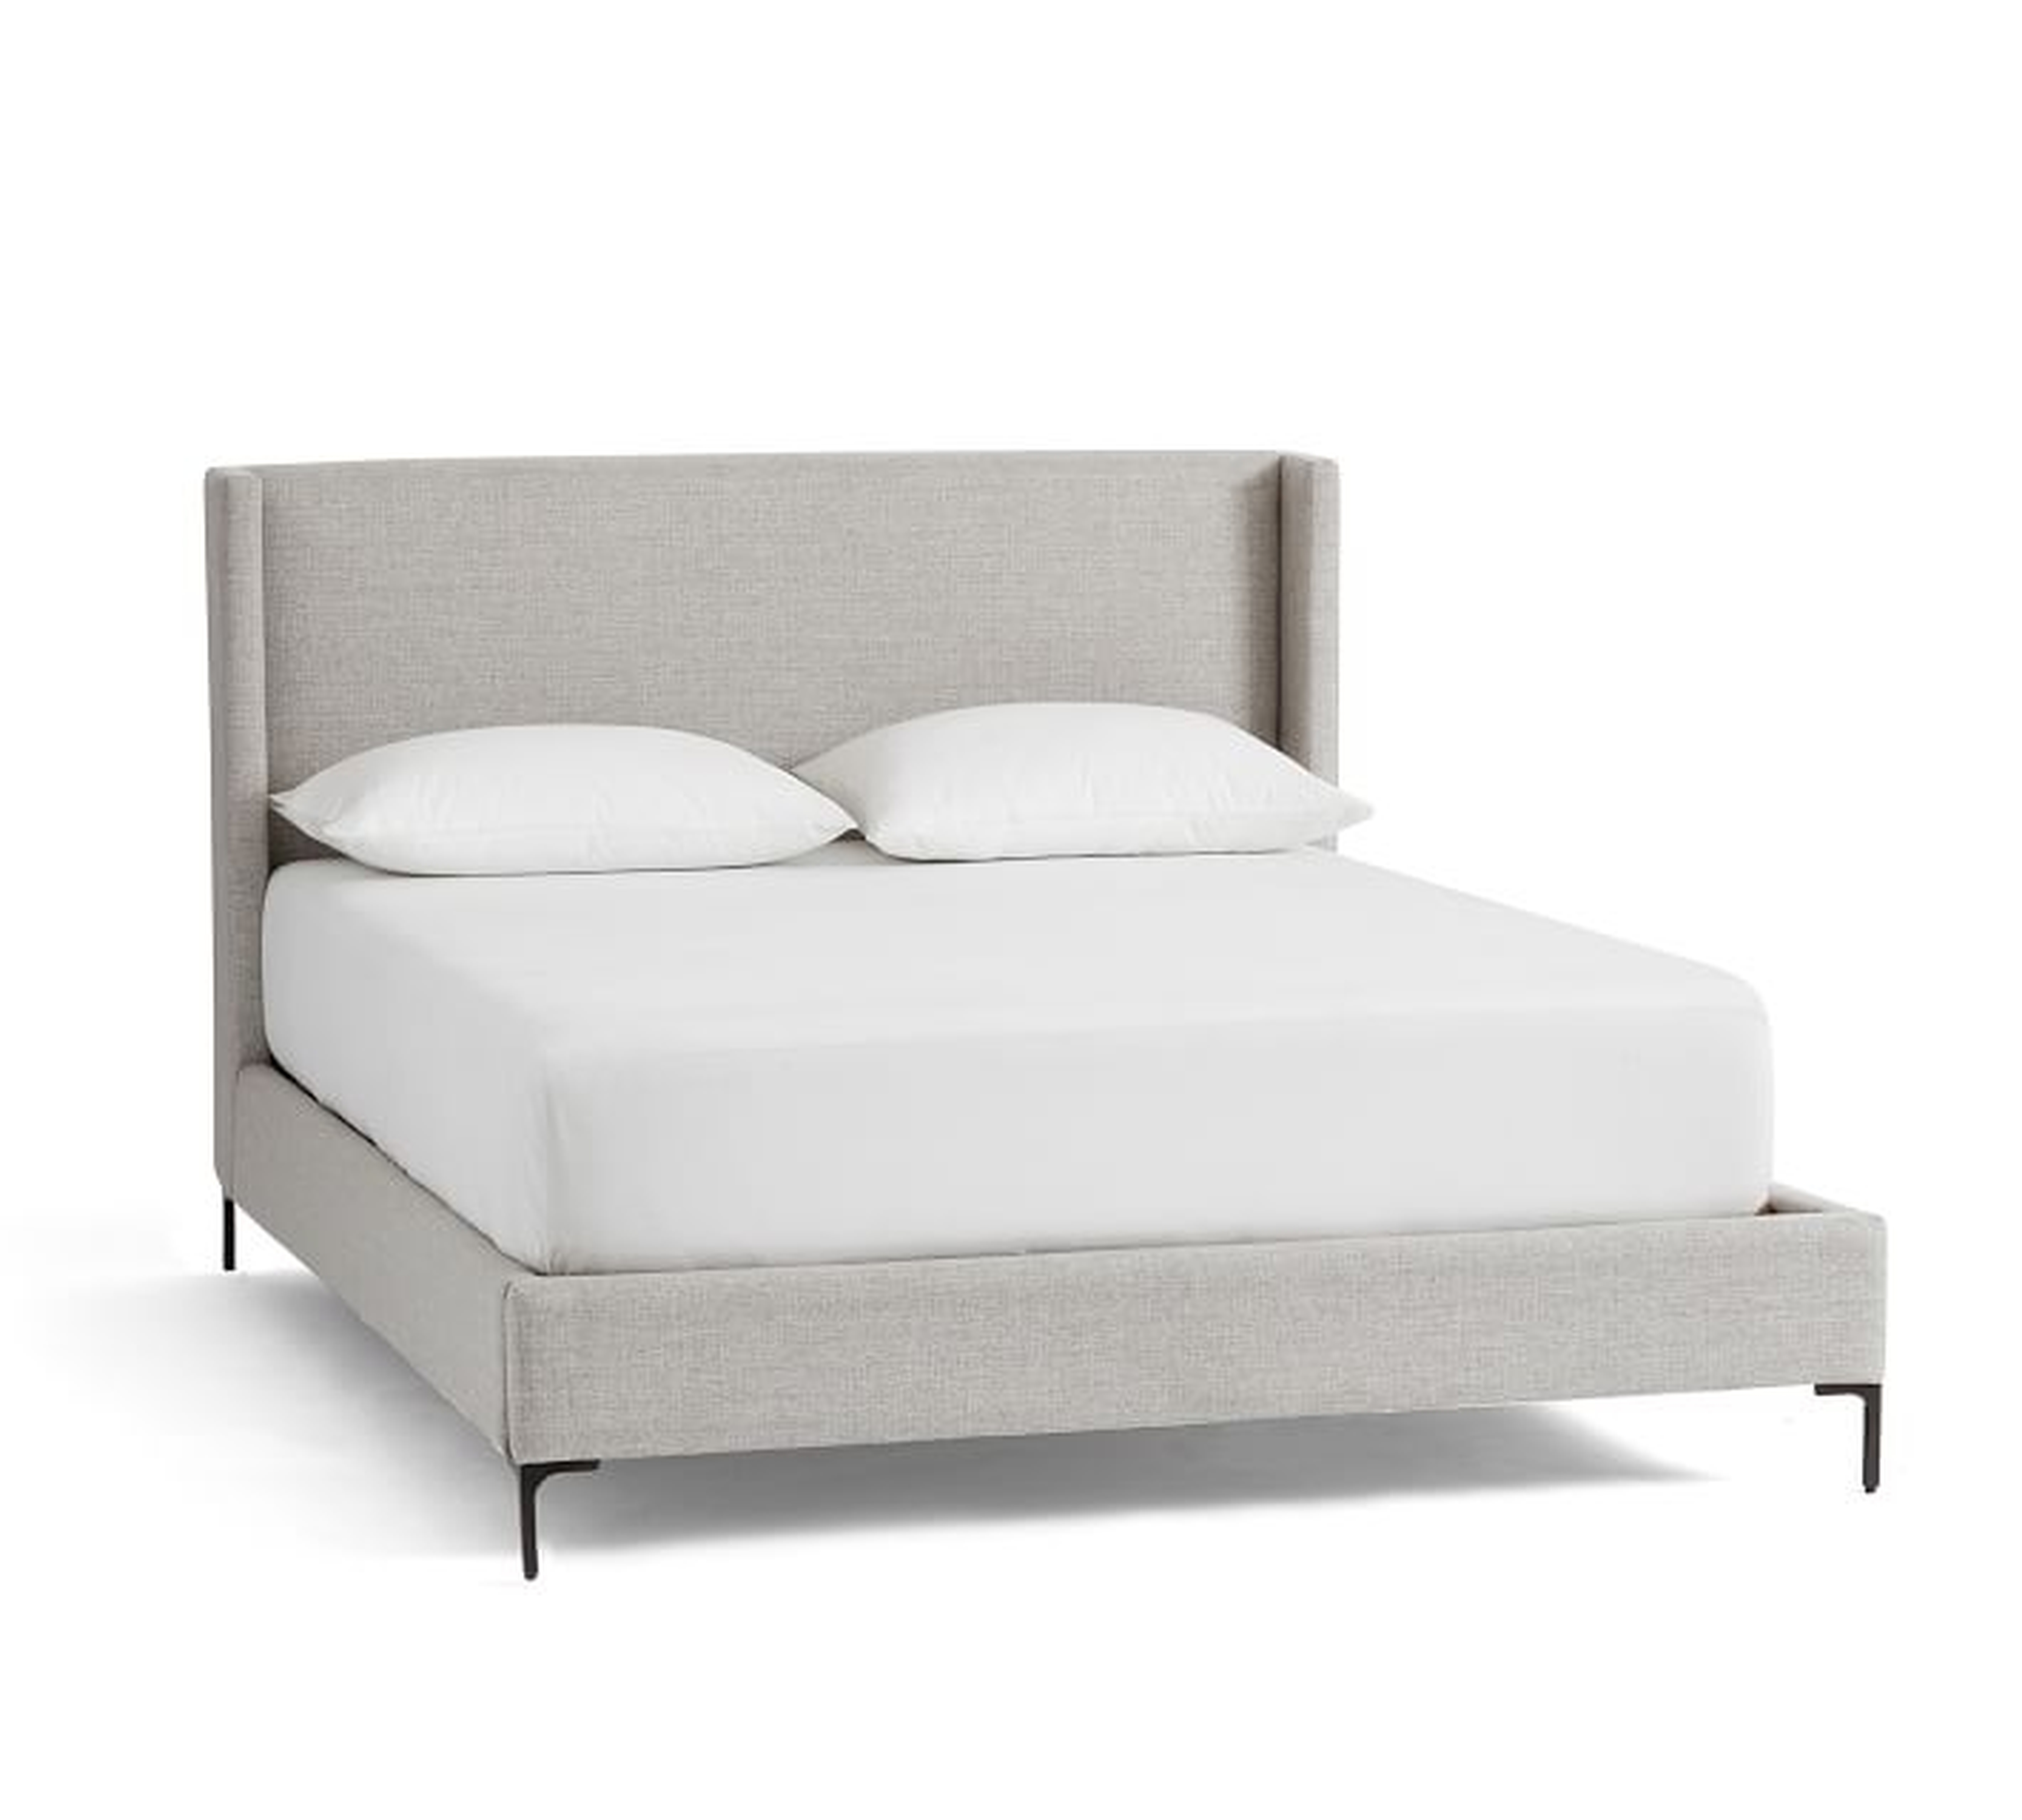 Jake Upholstered Platform Bed with Metal Legs - Pottery Barn